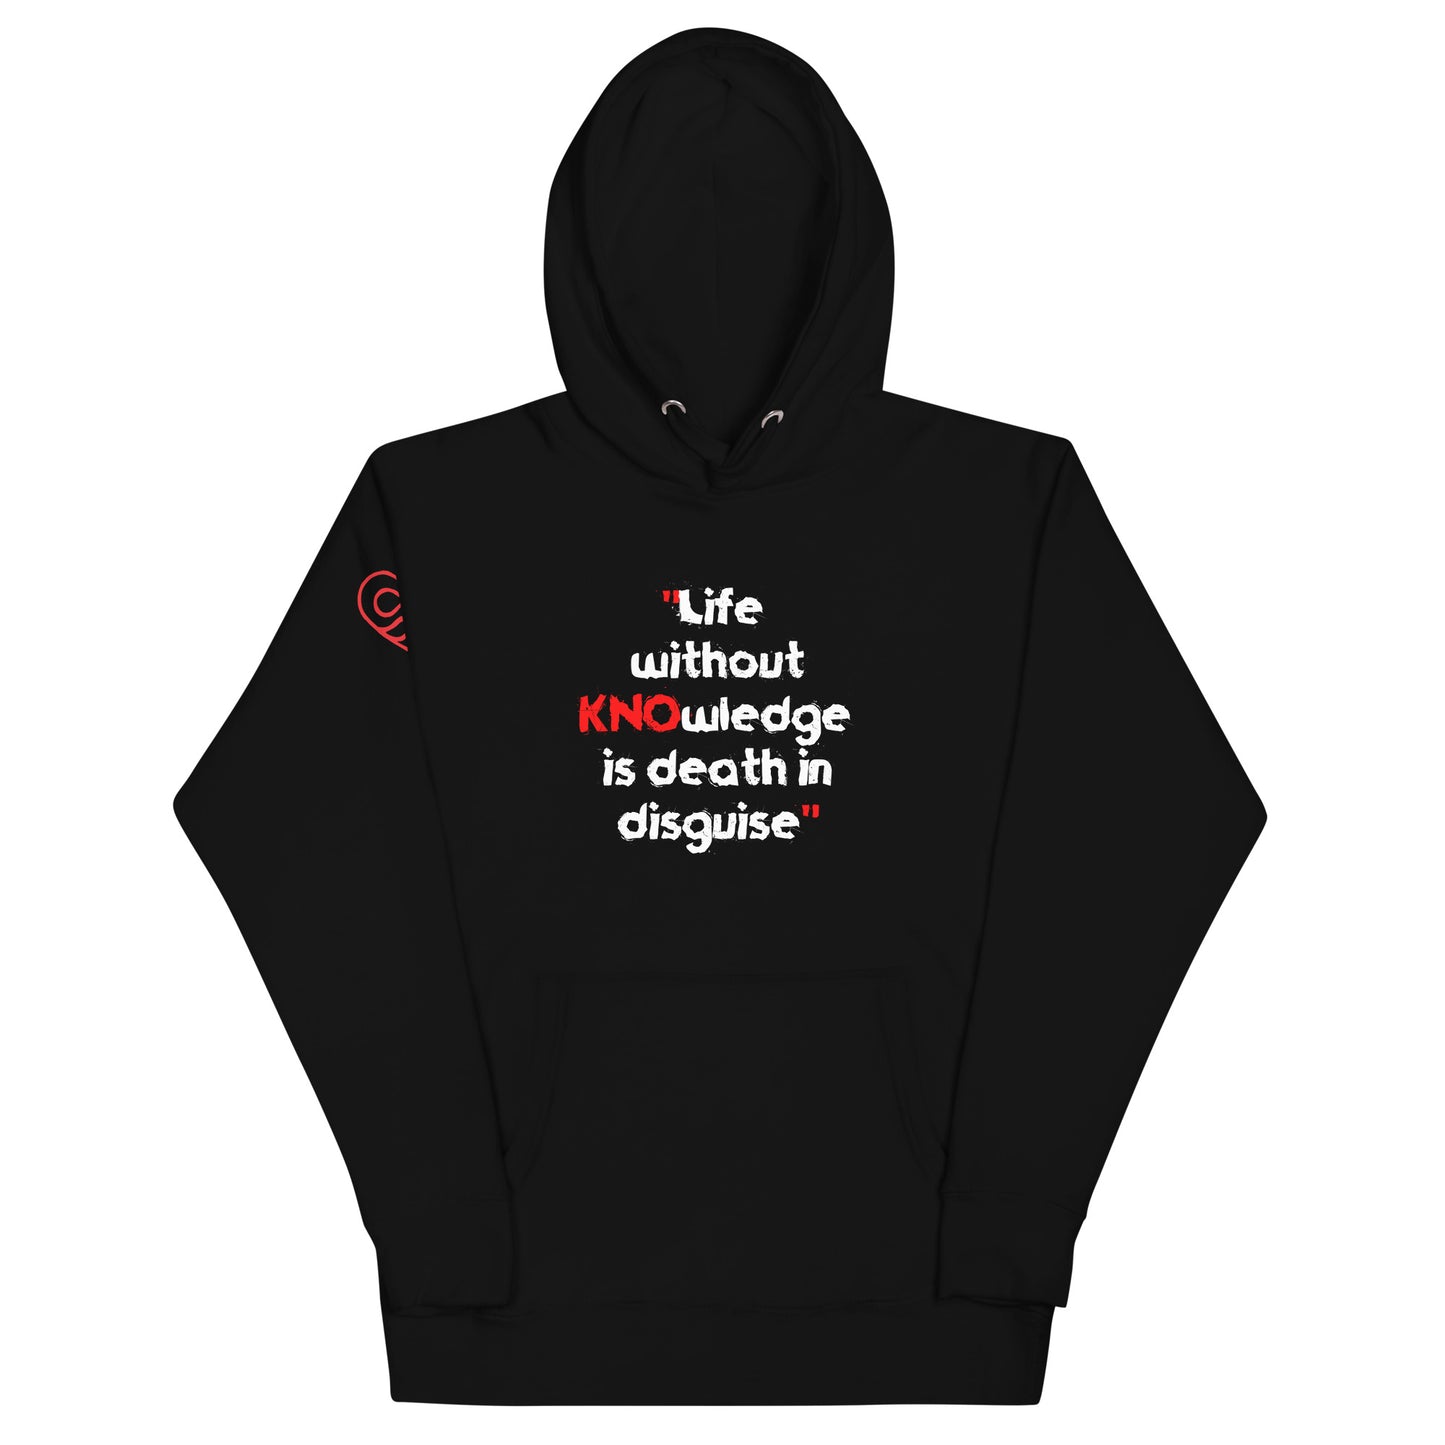 Life Without KNOwledge (black)